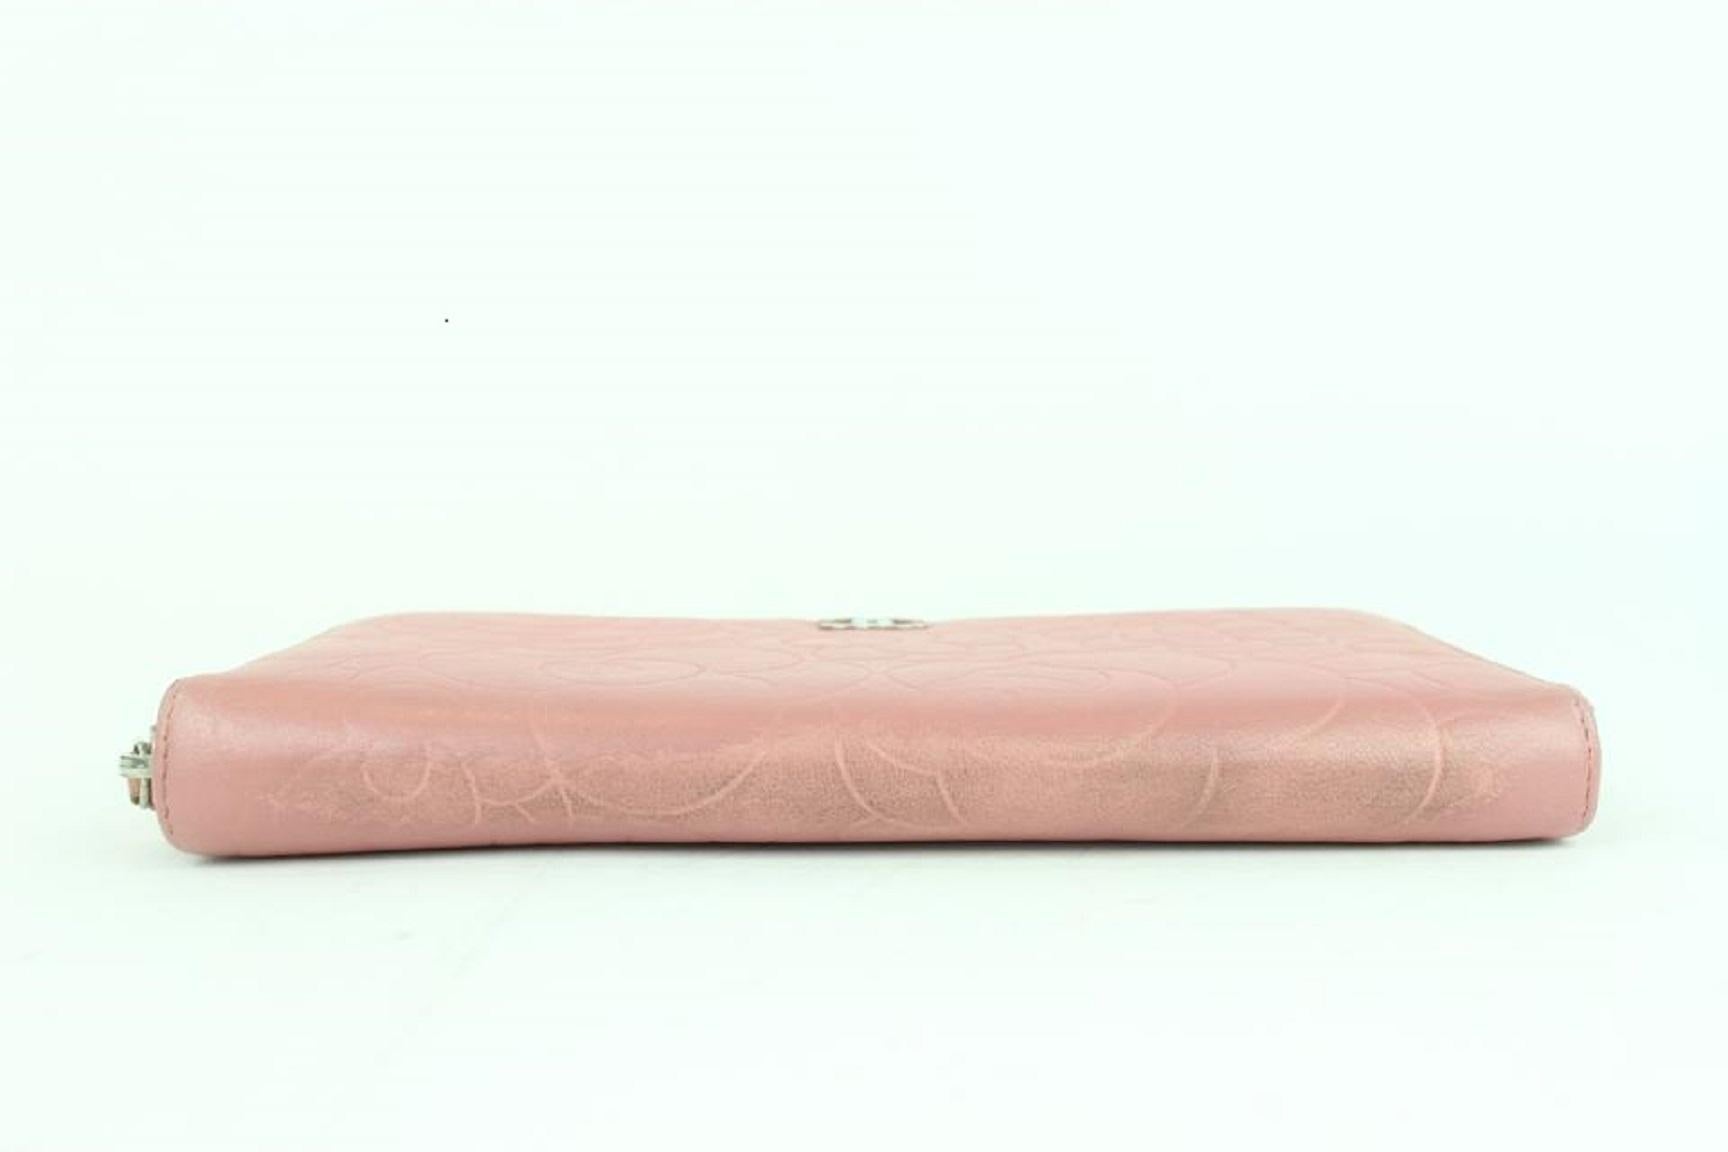 Chanel Embossed Camellia Gusset Zip Around Wallet 2cj1110 Pink Leather Clutch For Sale 5